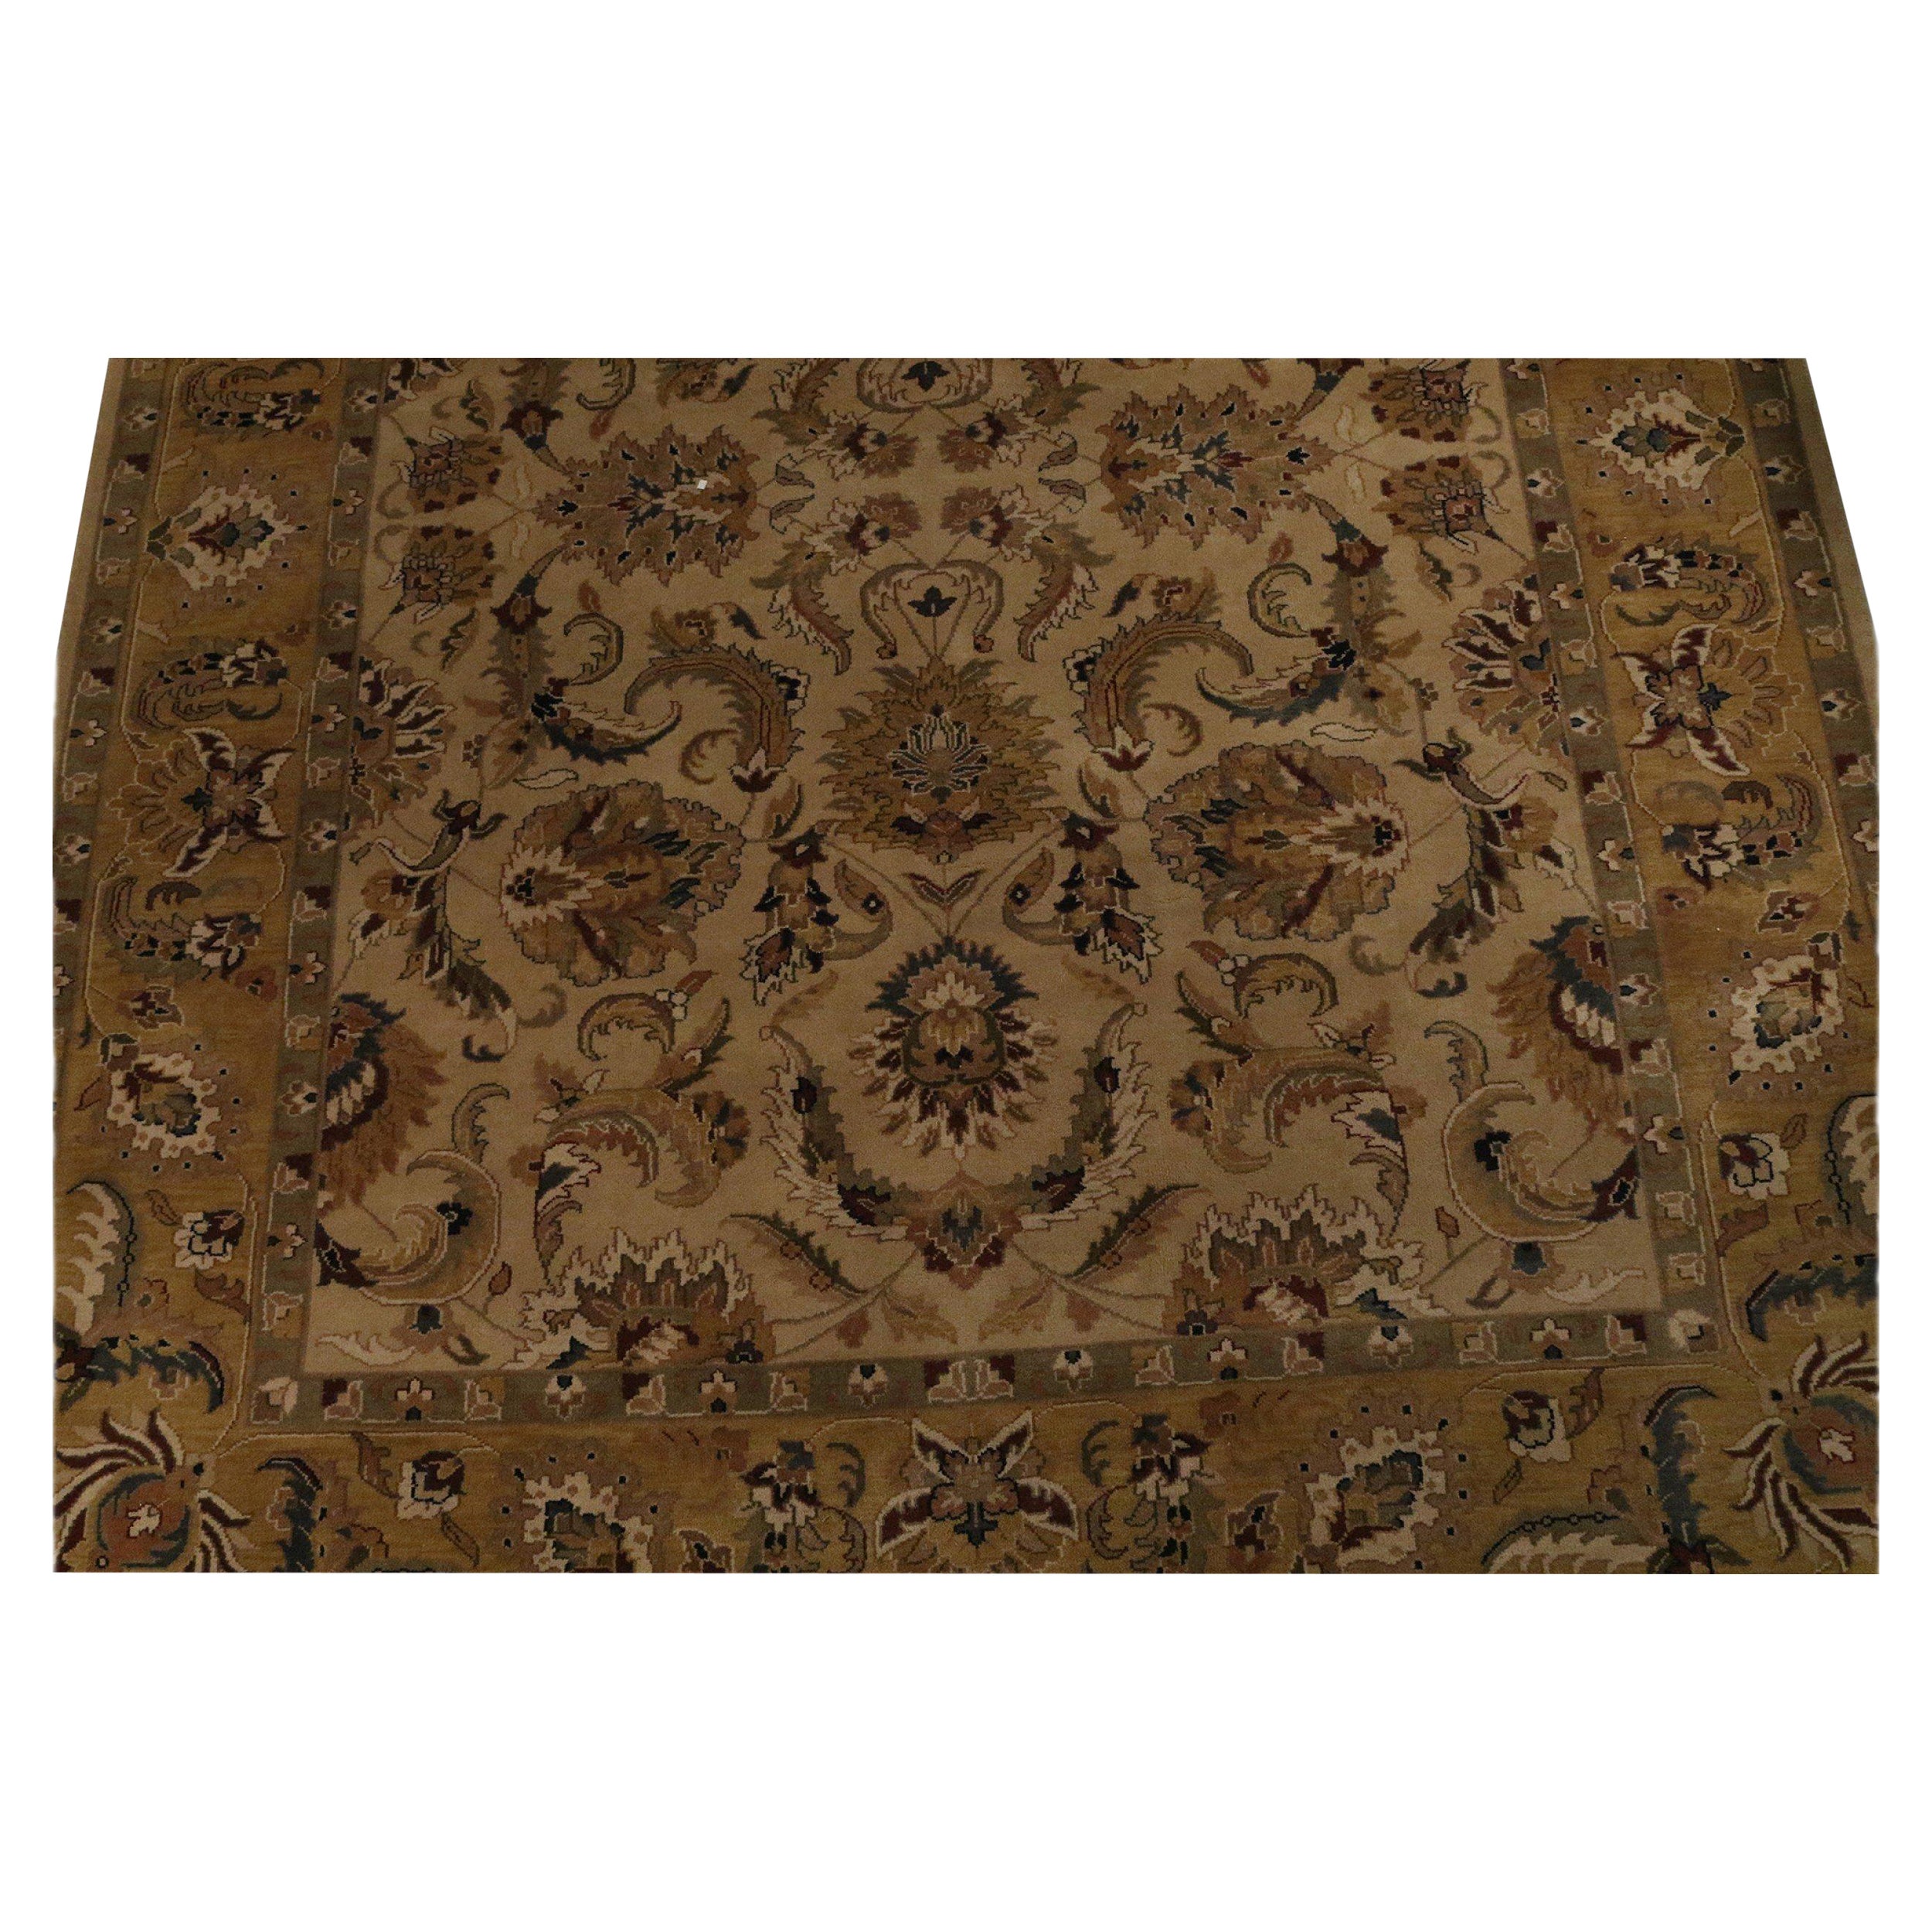 Middle Eastern Turkish Gold and Brown Patterned Area Rug For Sale